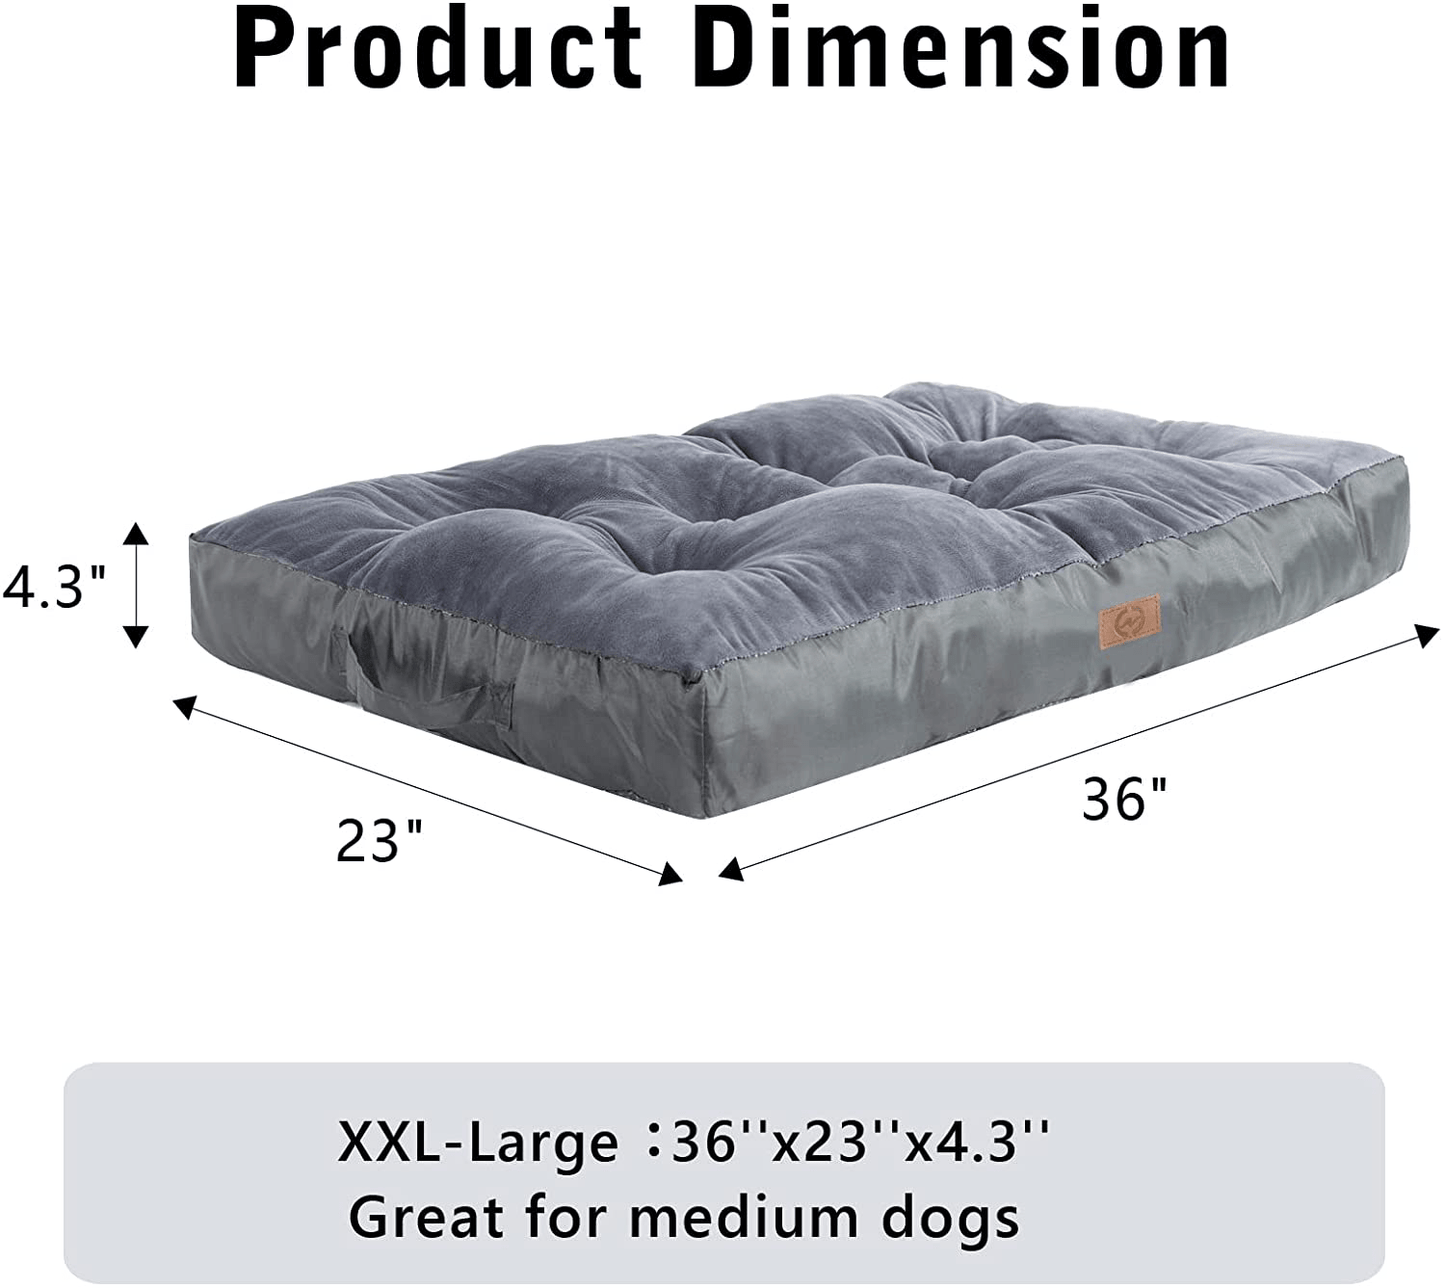 Xuemi Dog Beds for Large Dogs, Soft Comfortable Cat and Dog Crate Mattress with Waterproof Bottom, Deluxe Plush Pet Cushion